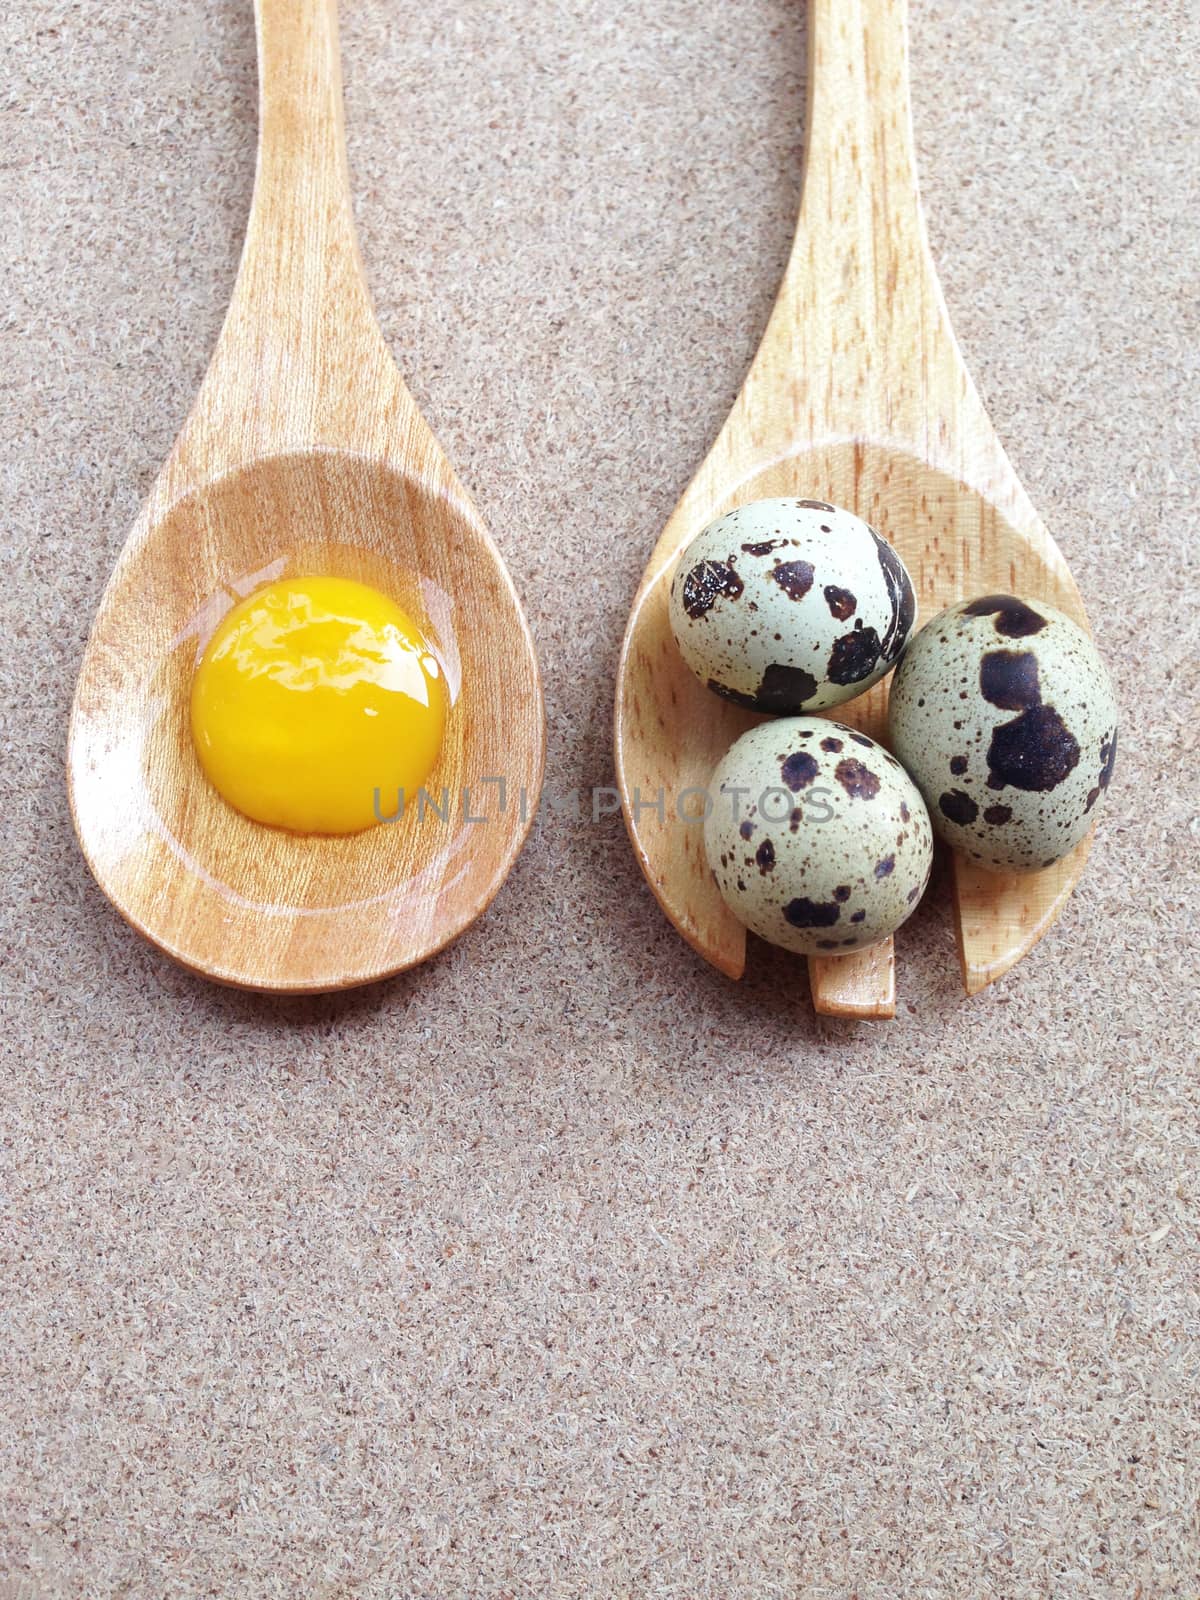 Quail eggs on wooden fork and egg yolk on wooden spoon on plywoo by Bowonpat